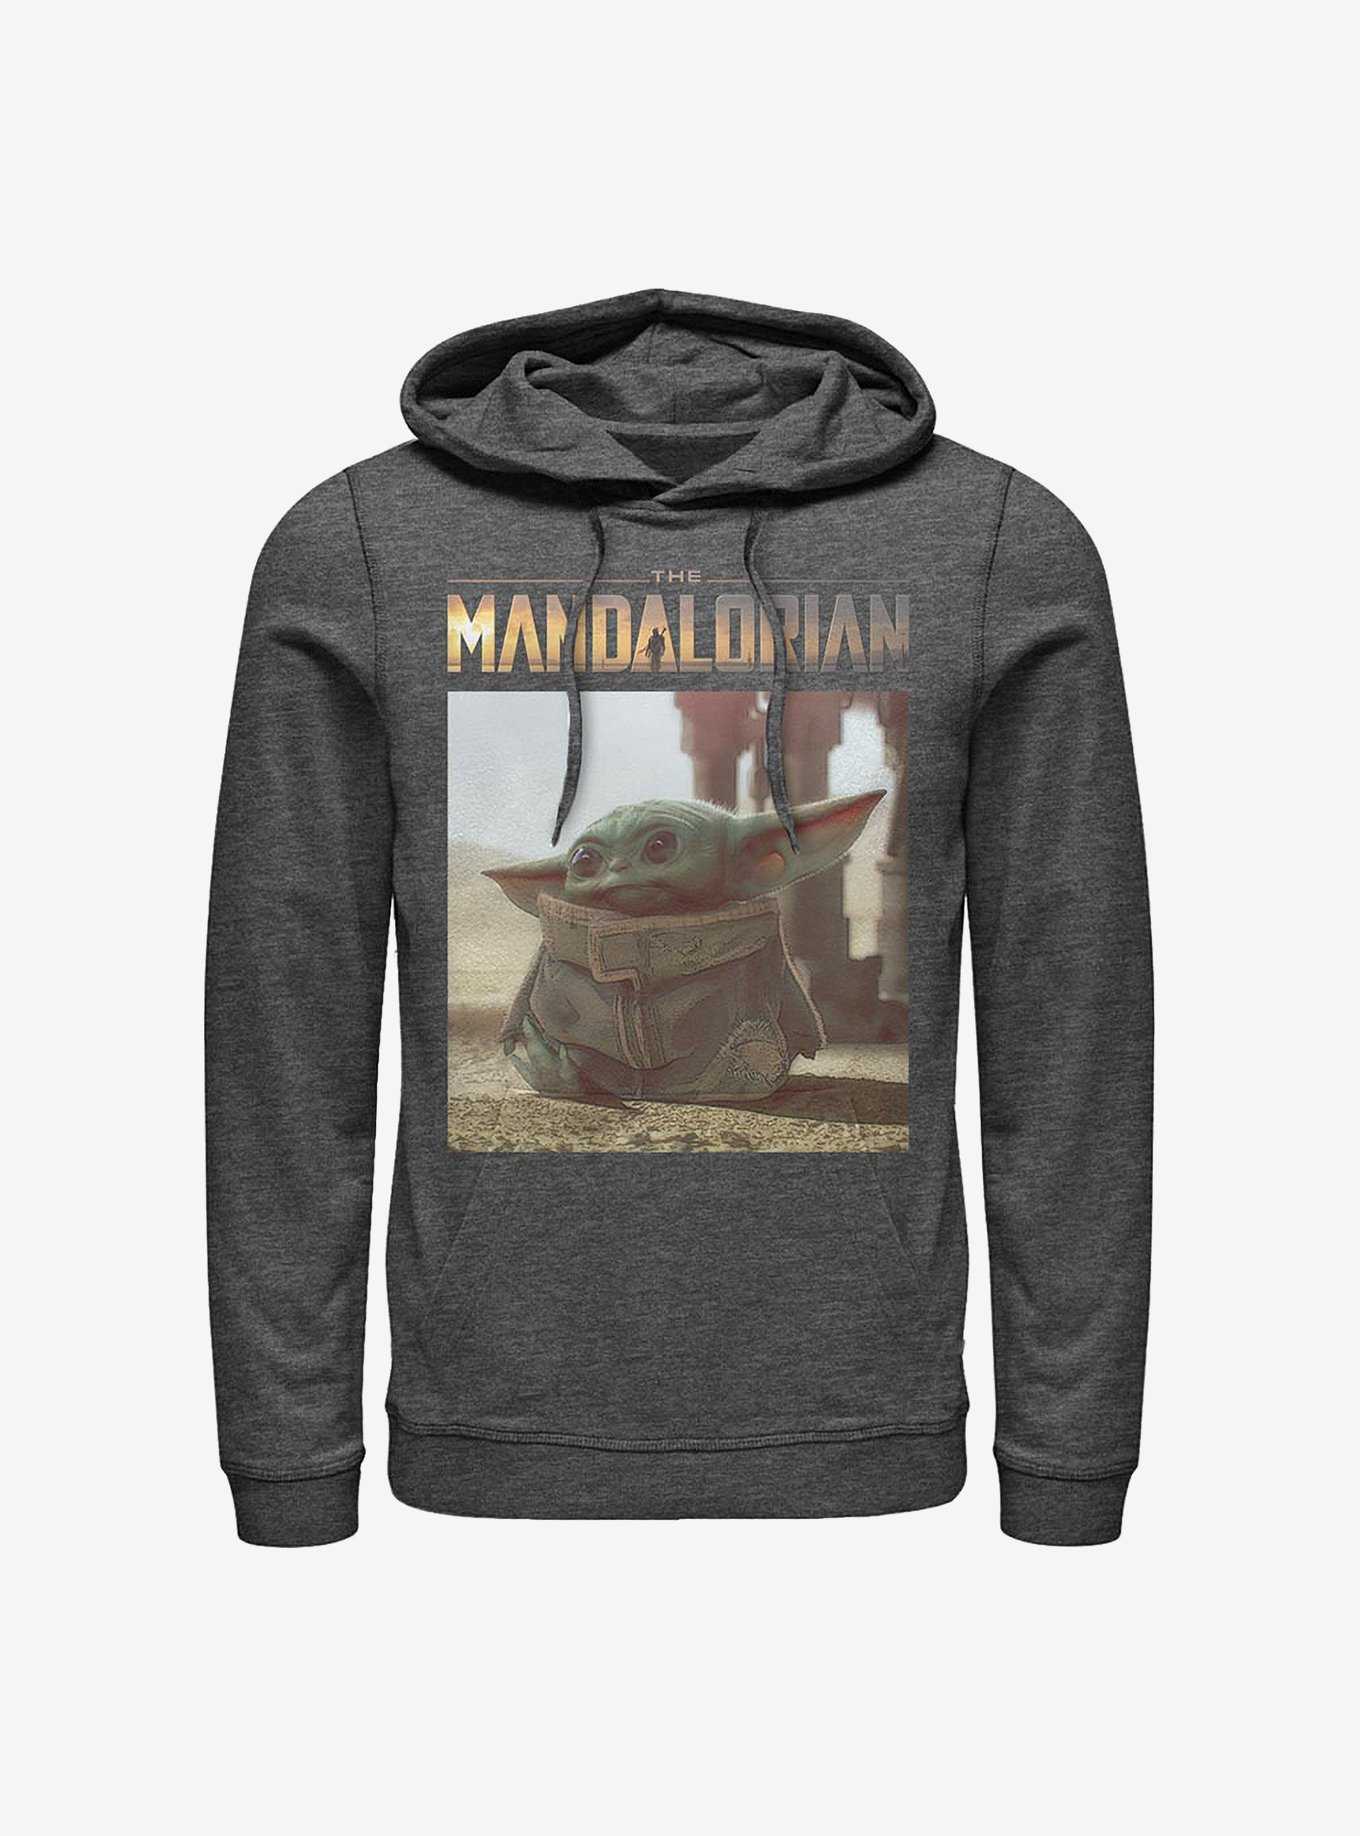 Star Wars The Mandalorian The Child Classic Pose Hoodie, , hi-res